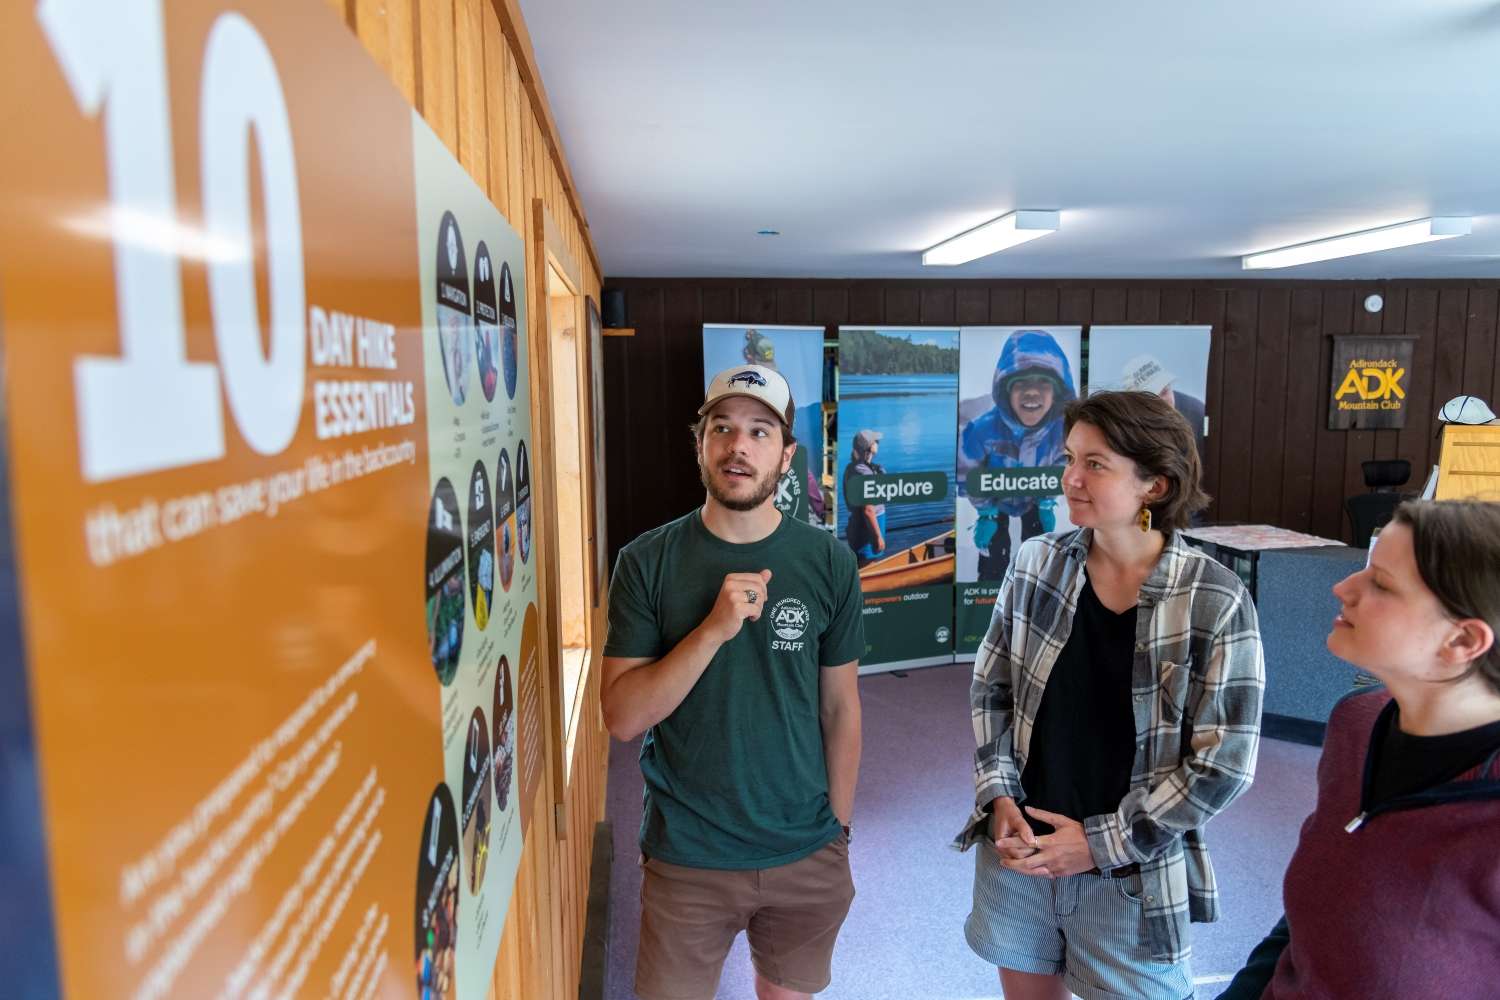 Henry Liebers, visitor information manager for the Adirondack Mountain Club, talks to hikers at the Cascade Welcome Center near Lake Placid. Photo courtesy of ADK